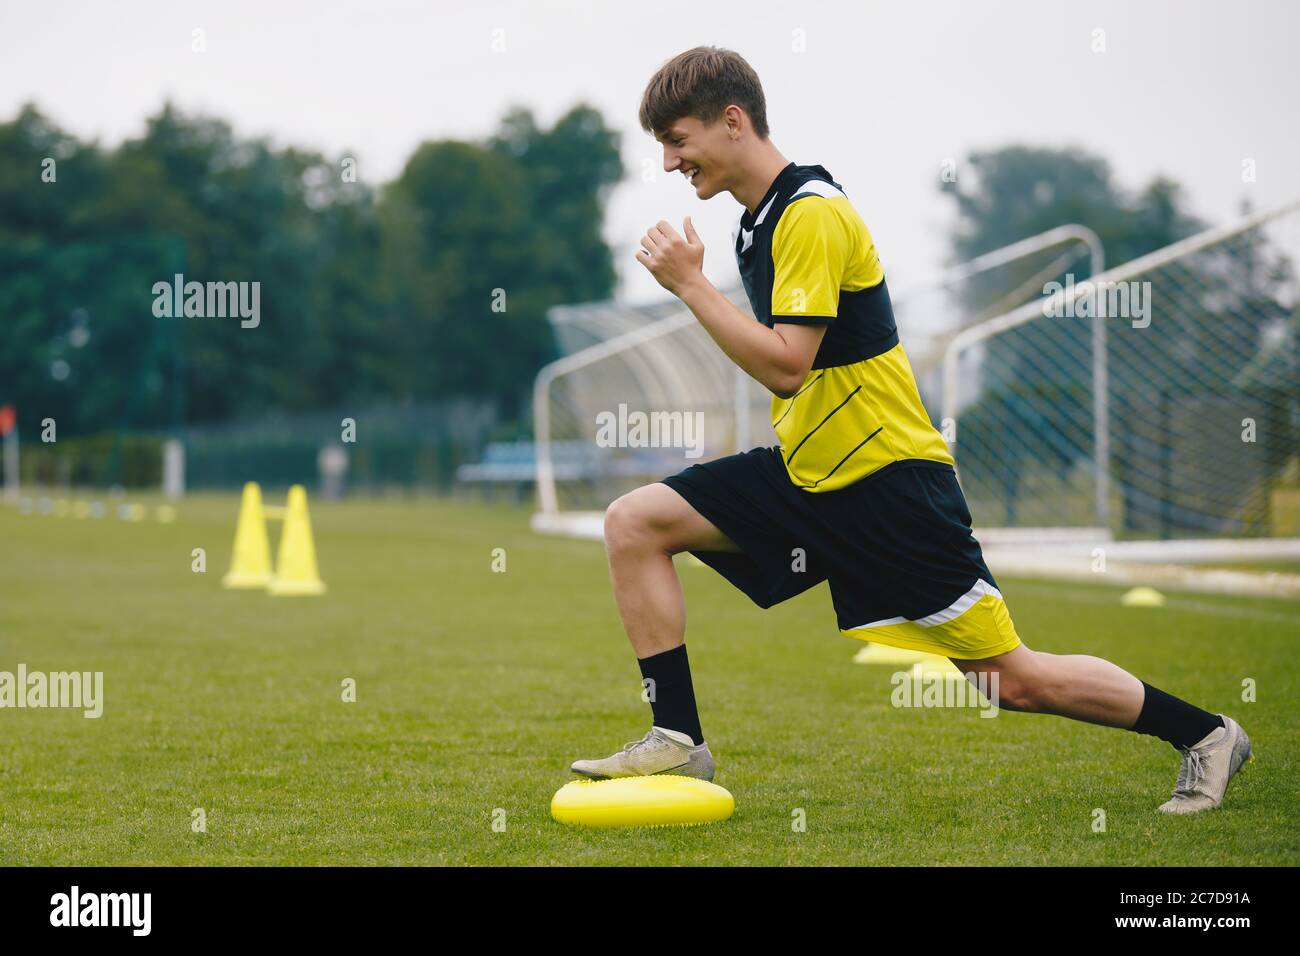 Stability Soccer Training on Balance Cushion. Sports Balance Training. Young Soccer Player Improving Skills. Player Training on the Field. Grass Footb Stock Photo